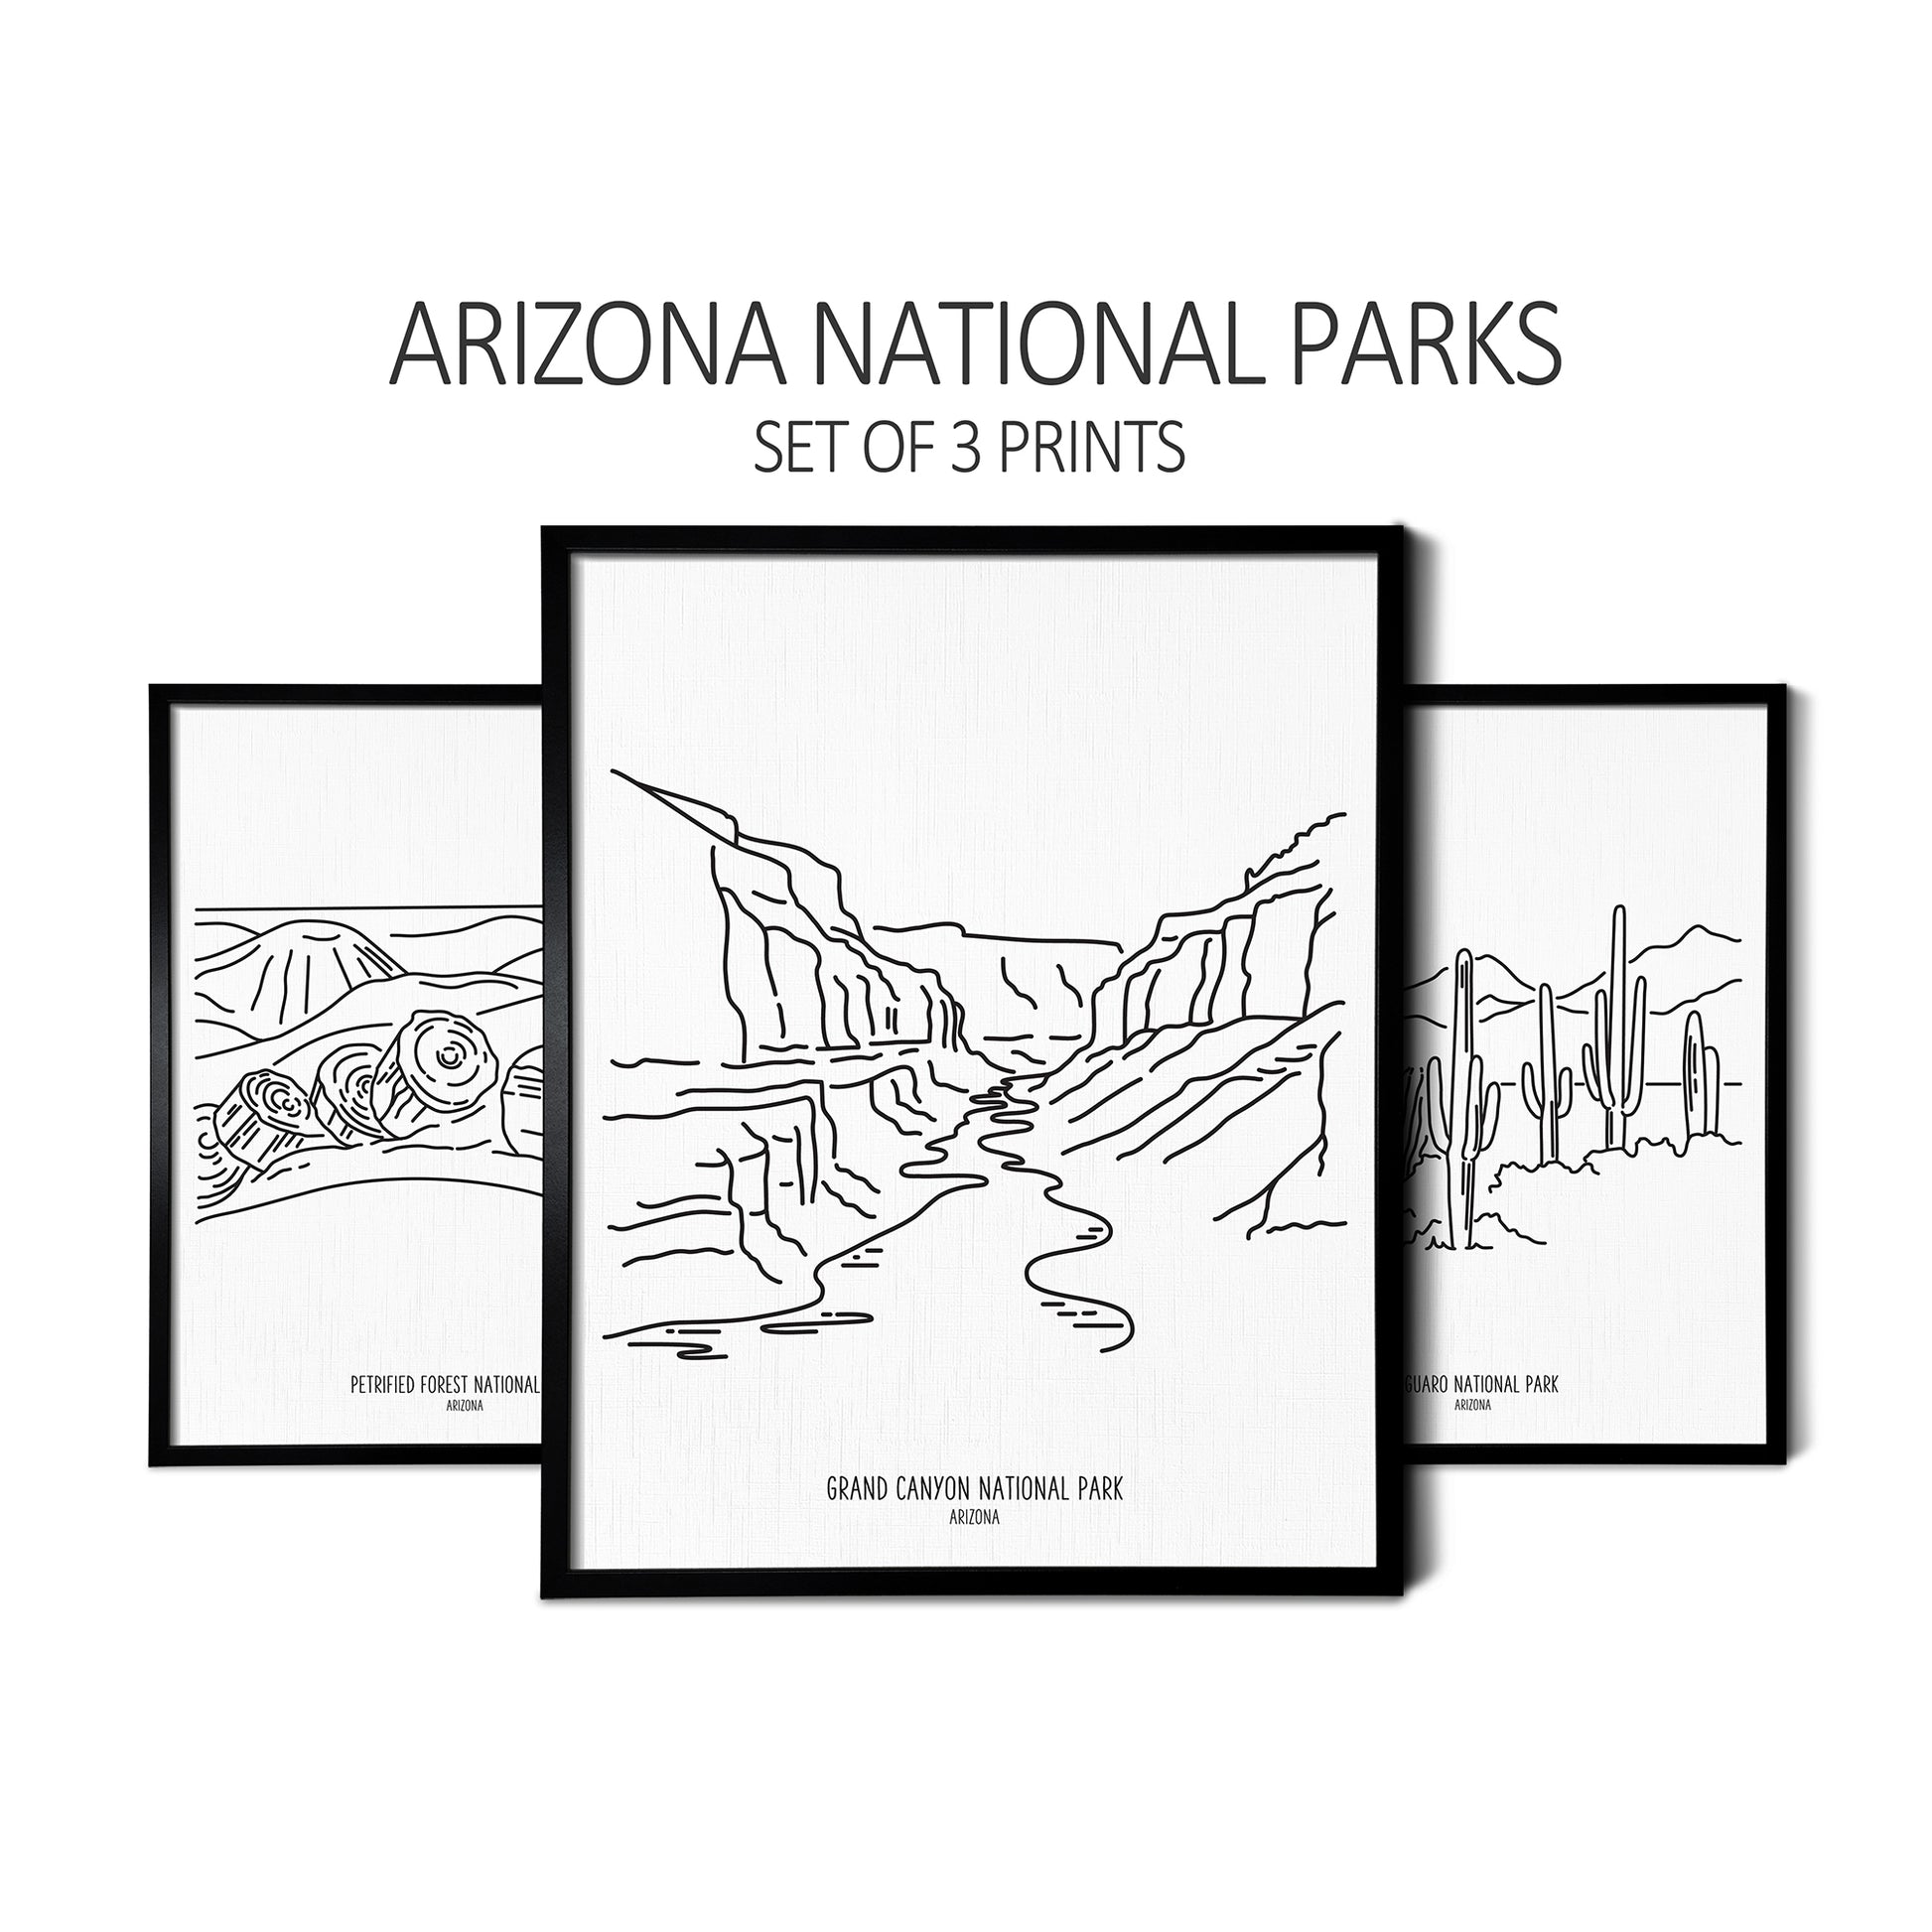 Line art drawings of Grand Canyon National Park, Petrified Forest National Park, and Saguaro National Park on white linen paper in a thin black picture frames